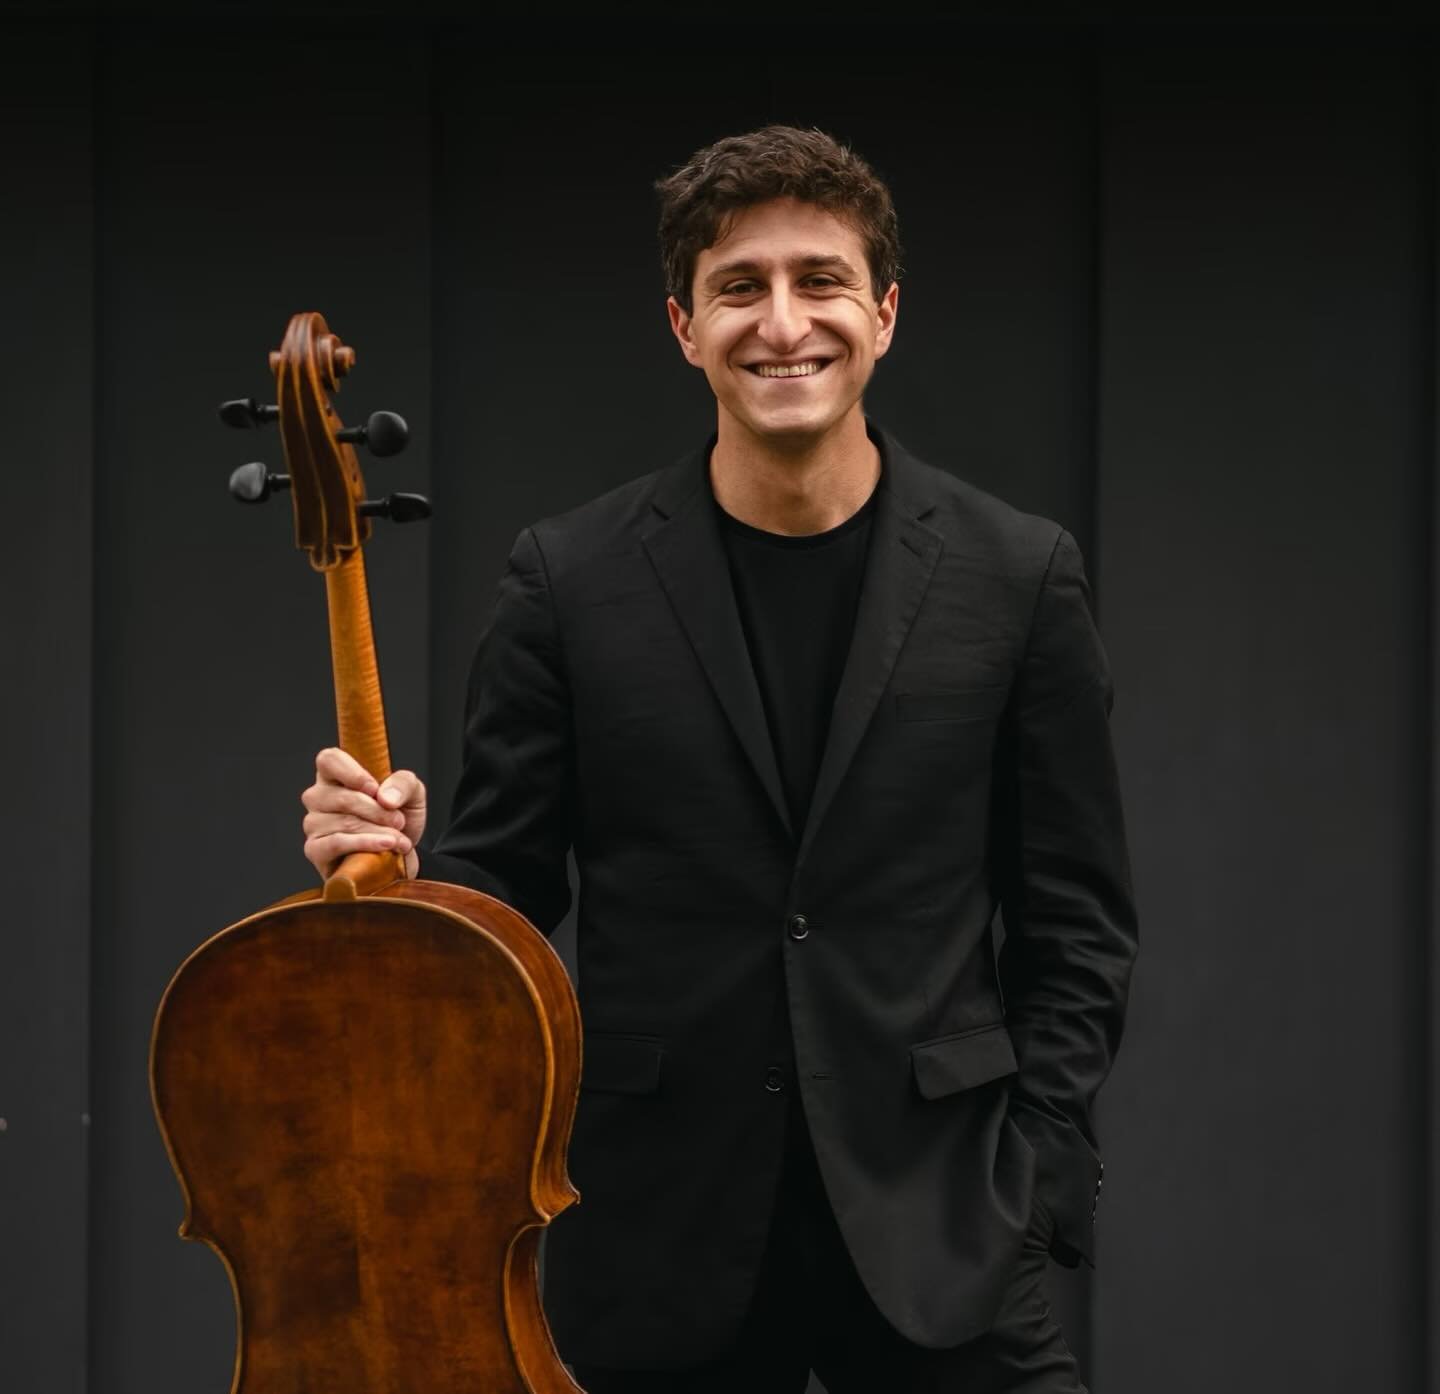 MEET CELLIST JOSHUA HALPERN: We welcome Josh who&rsquo;s joining us for our upcoming concerts on April 13 and 14, performing works by Valentin Silvestrov, Domenic Salerni and Sergei Rachmaninoff. Josh has appeared on stages across the world as a solo